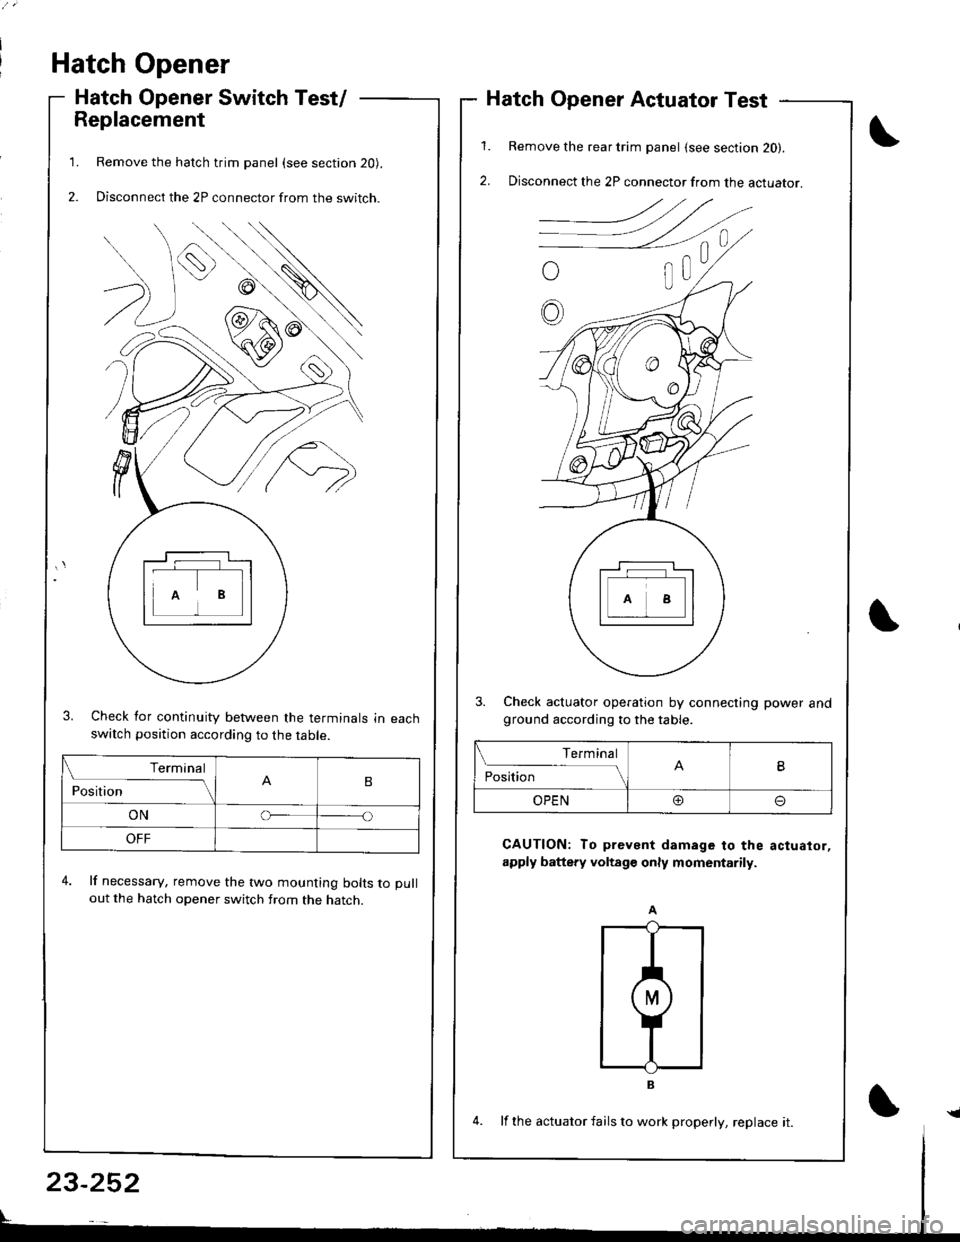 HONDA INTEGRA 1998 4.G User Guide Hatch Opener
Hatch Opener Switch Test/
Replacement
Remove the hatch trim panel (see section 20).
Disconnect the 2P connector from the switch.
3. Check for continuity between the terminals in eachswatc